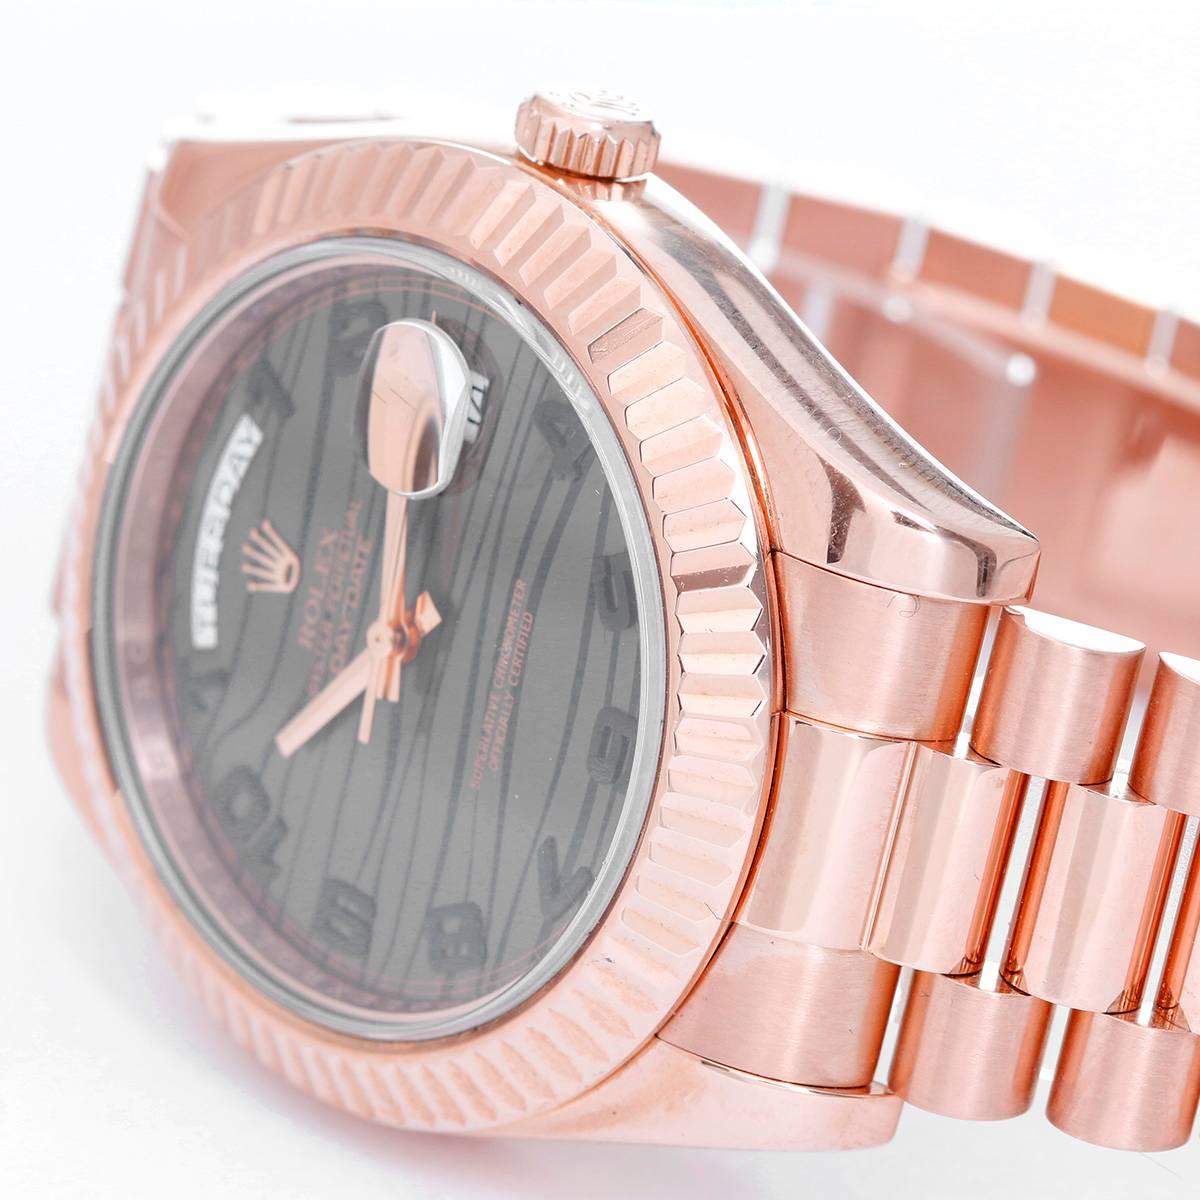 Rolex President Day-Date II Men's 18k Rose Gold Watch 218235 -  Automatic winding; quick-set; sapphire crystal. 18k rose gold case with fluted bezel (41mm diameter). Wave dial with black arabic  numerals. 18k rose gold hidden-clasp President